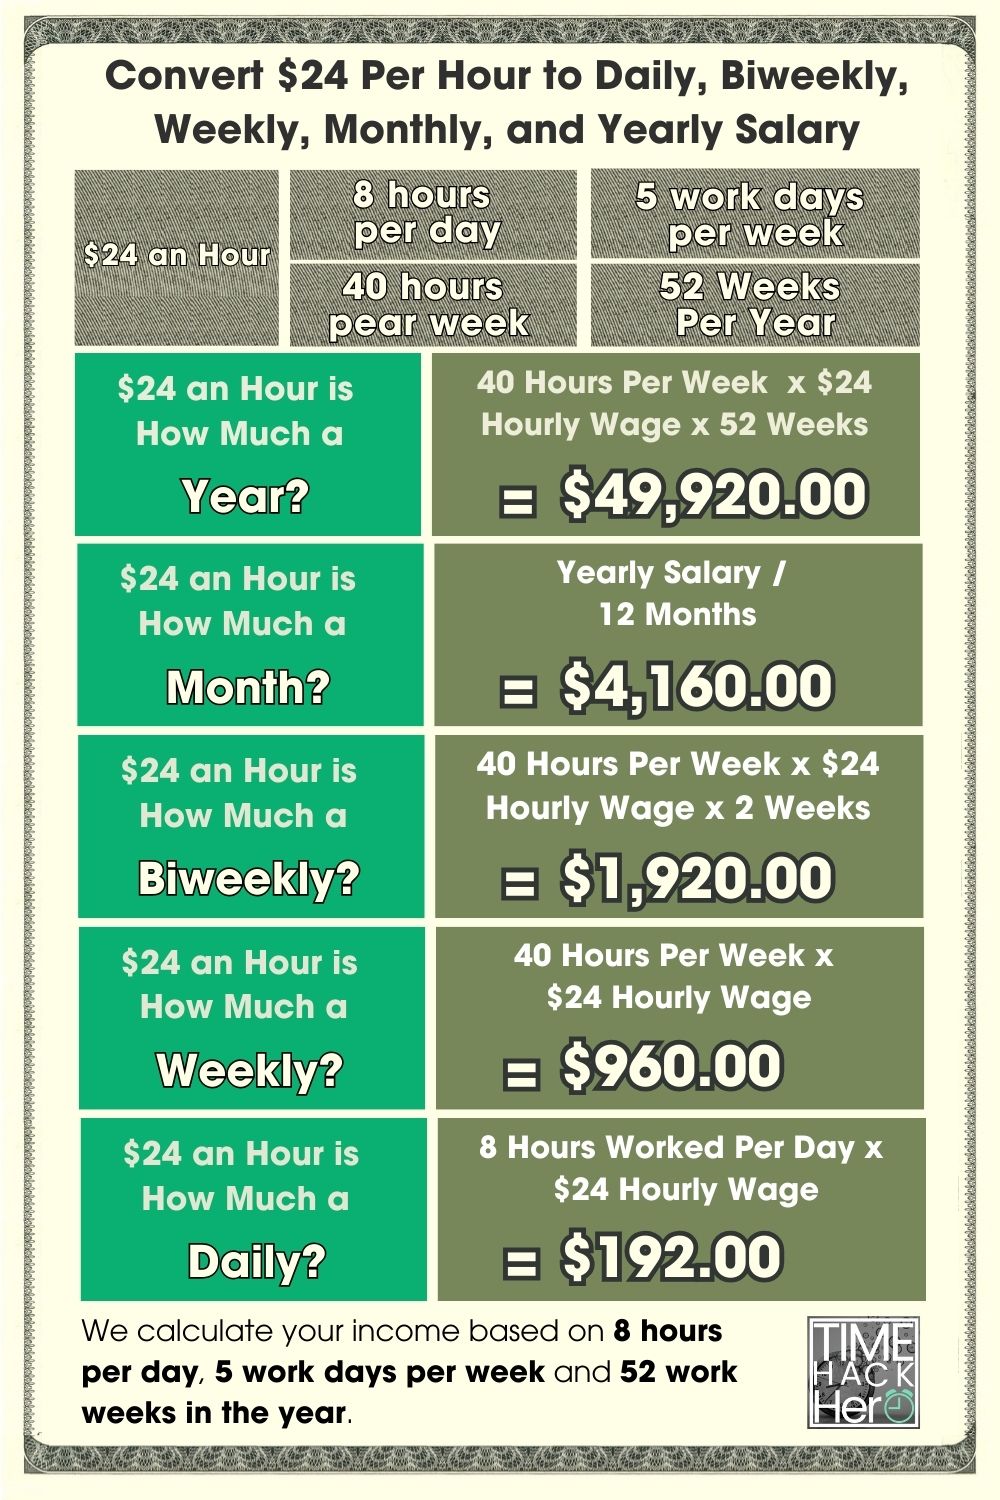 Convert $24 Per Hour to Daily, Biweekly, Weekly, Monthly, and Yearly Salary